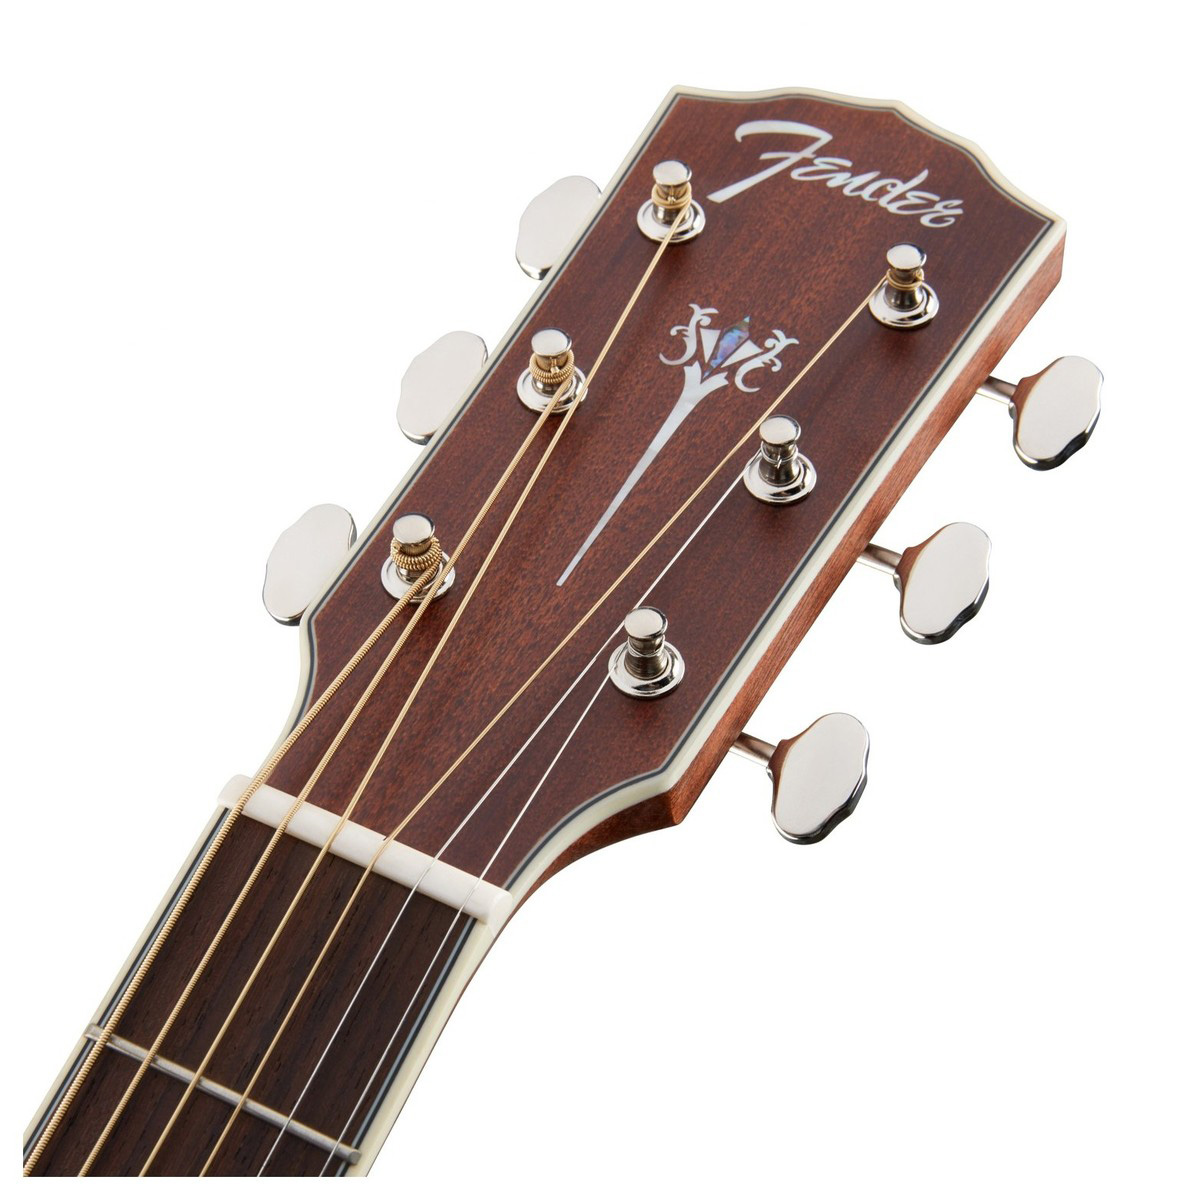 Fender PM-1 Dreadnought All Mahogany with Case, Natural Гитары акустические